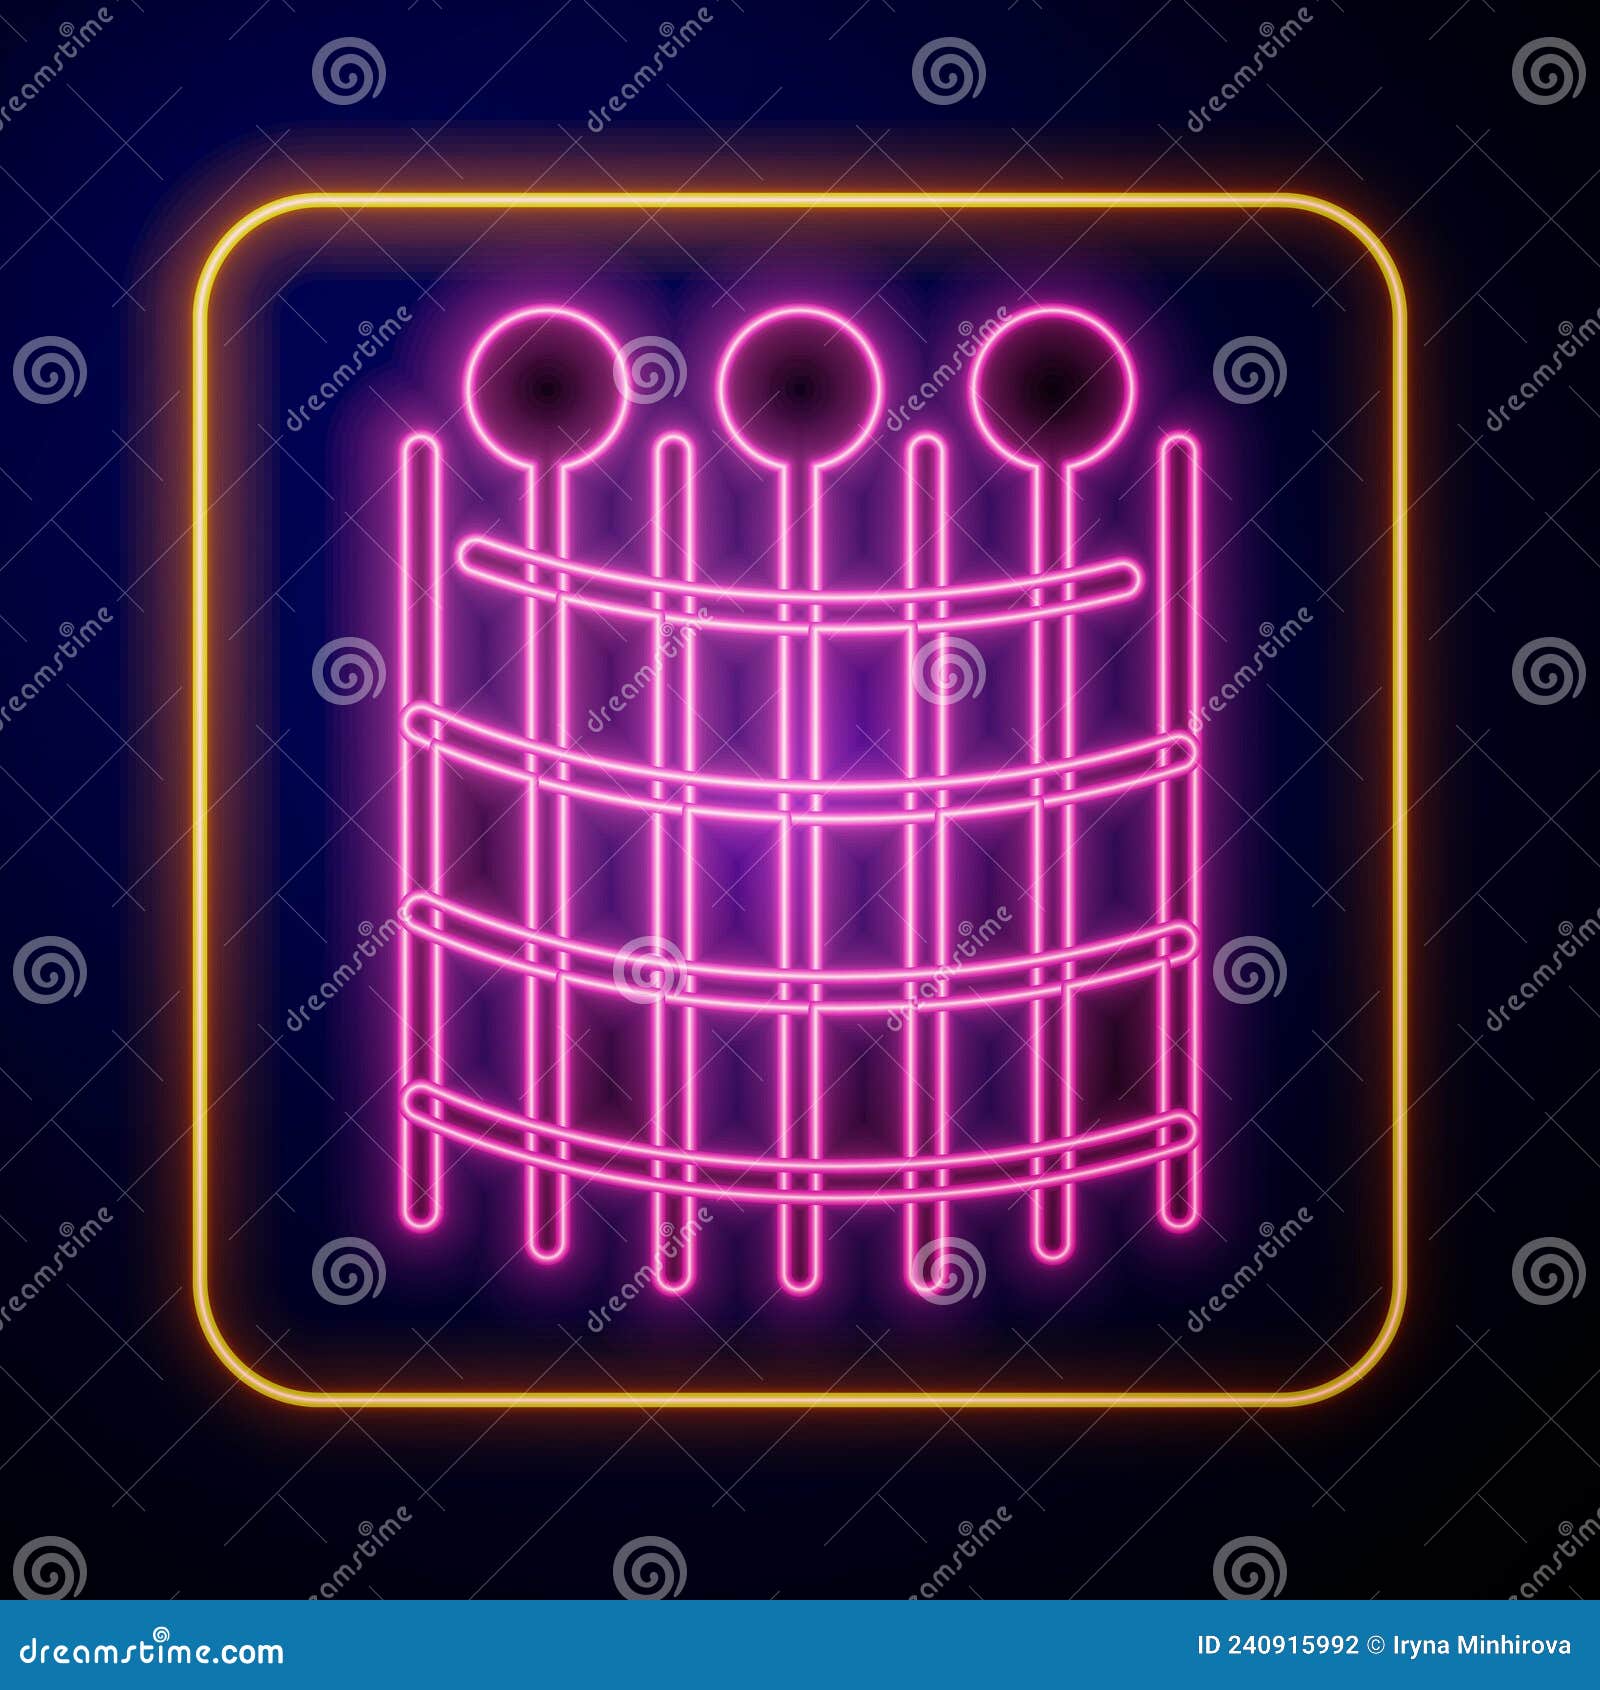 Glowing Neon Fishing Net Pattern Icon Isolated on Black Background